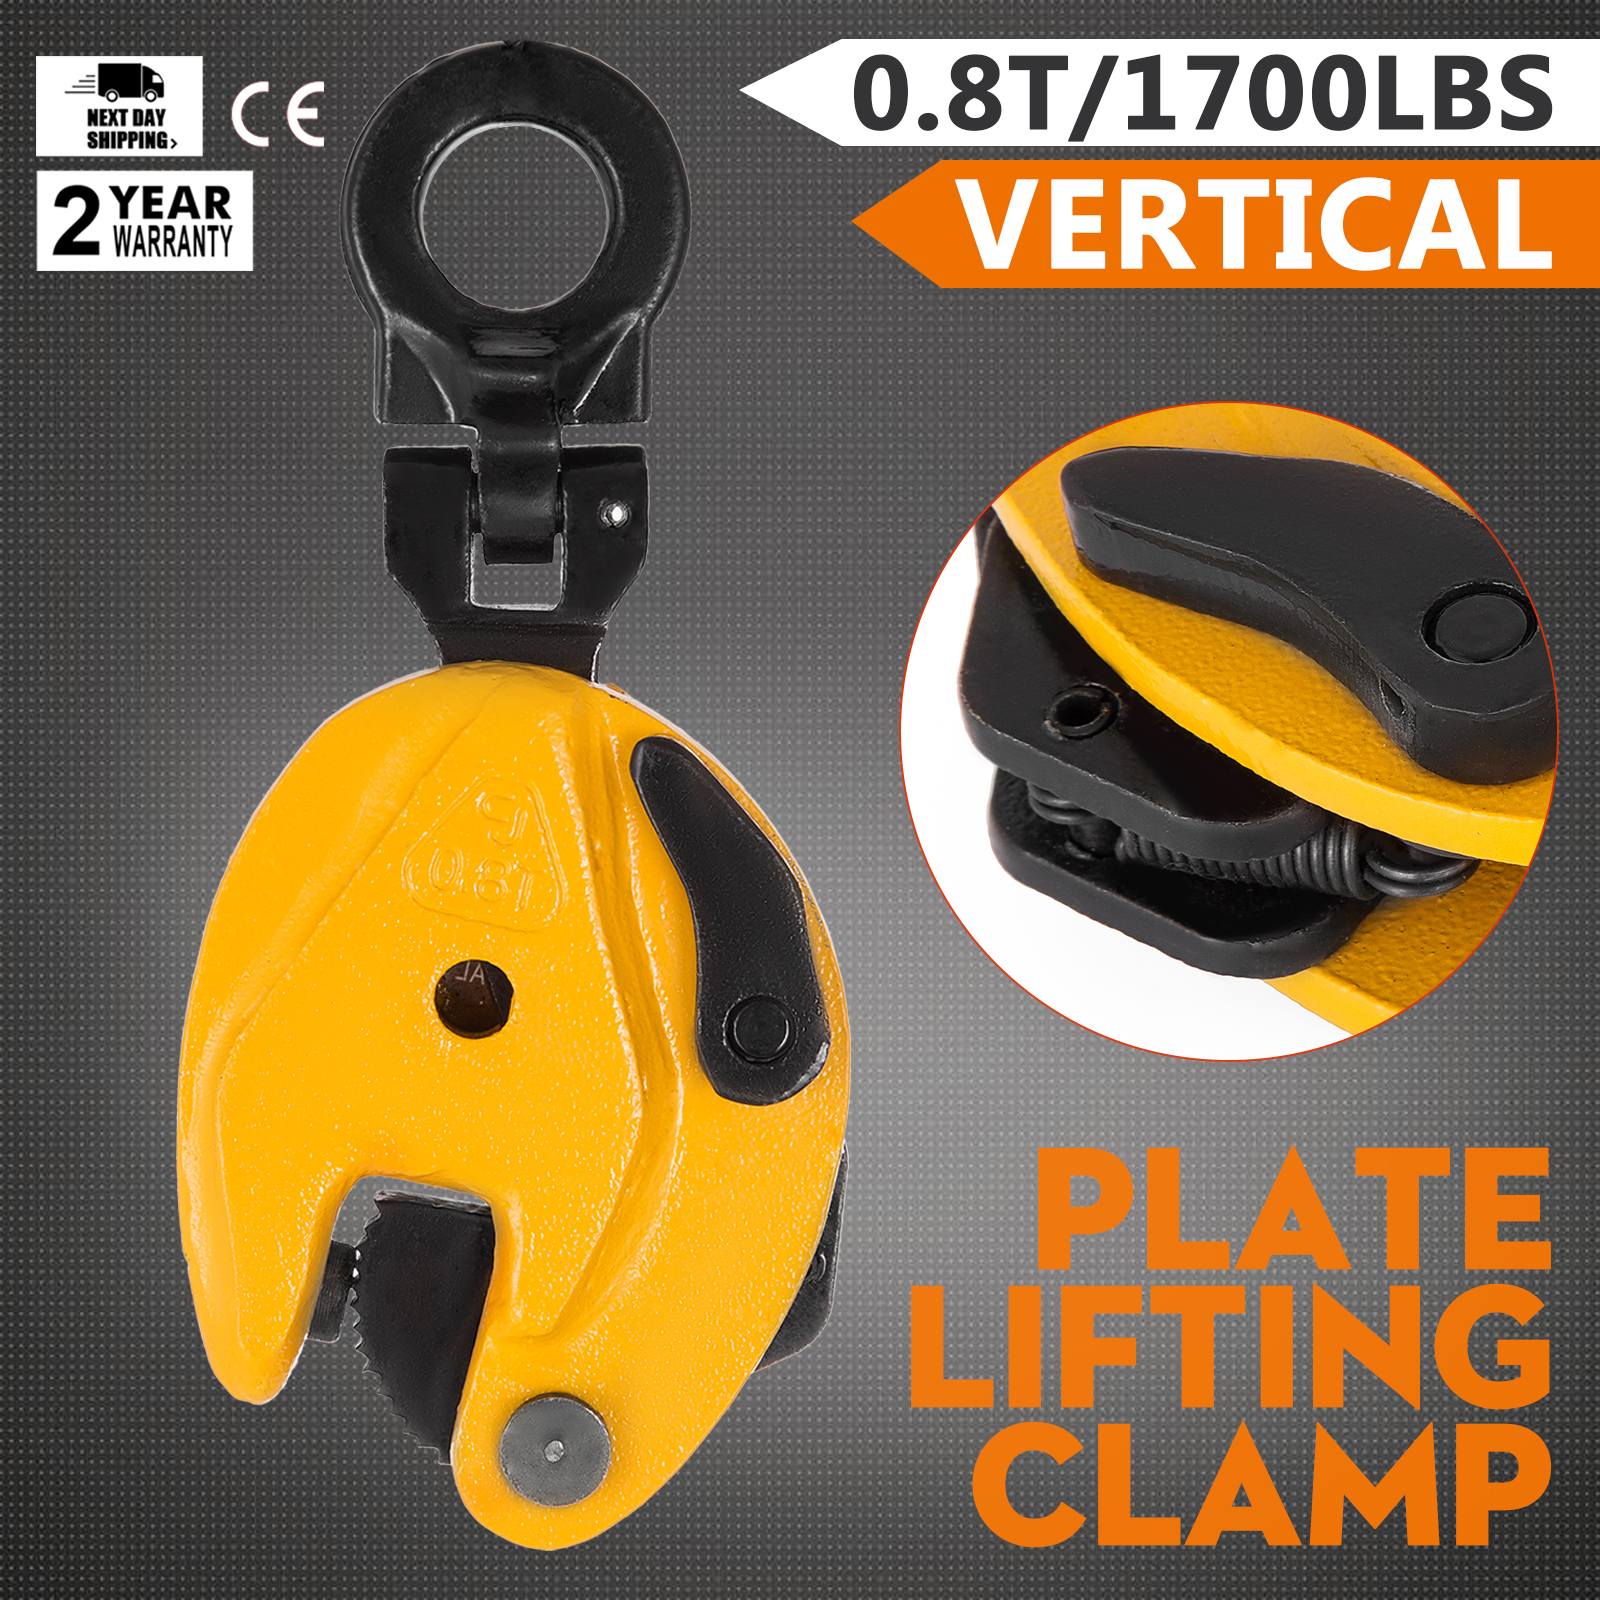 0.8T/1T/2T Industrail Vertical Plate Lifting Clamp  Lift 1760-4400lbs 